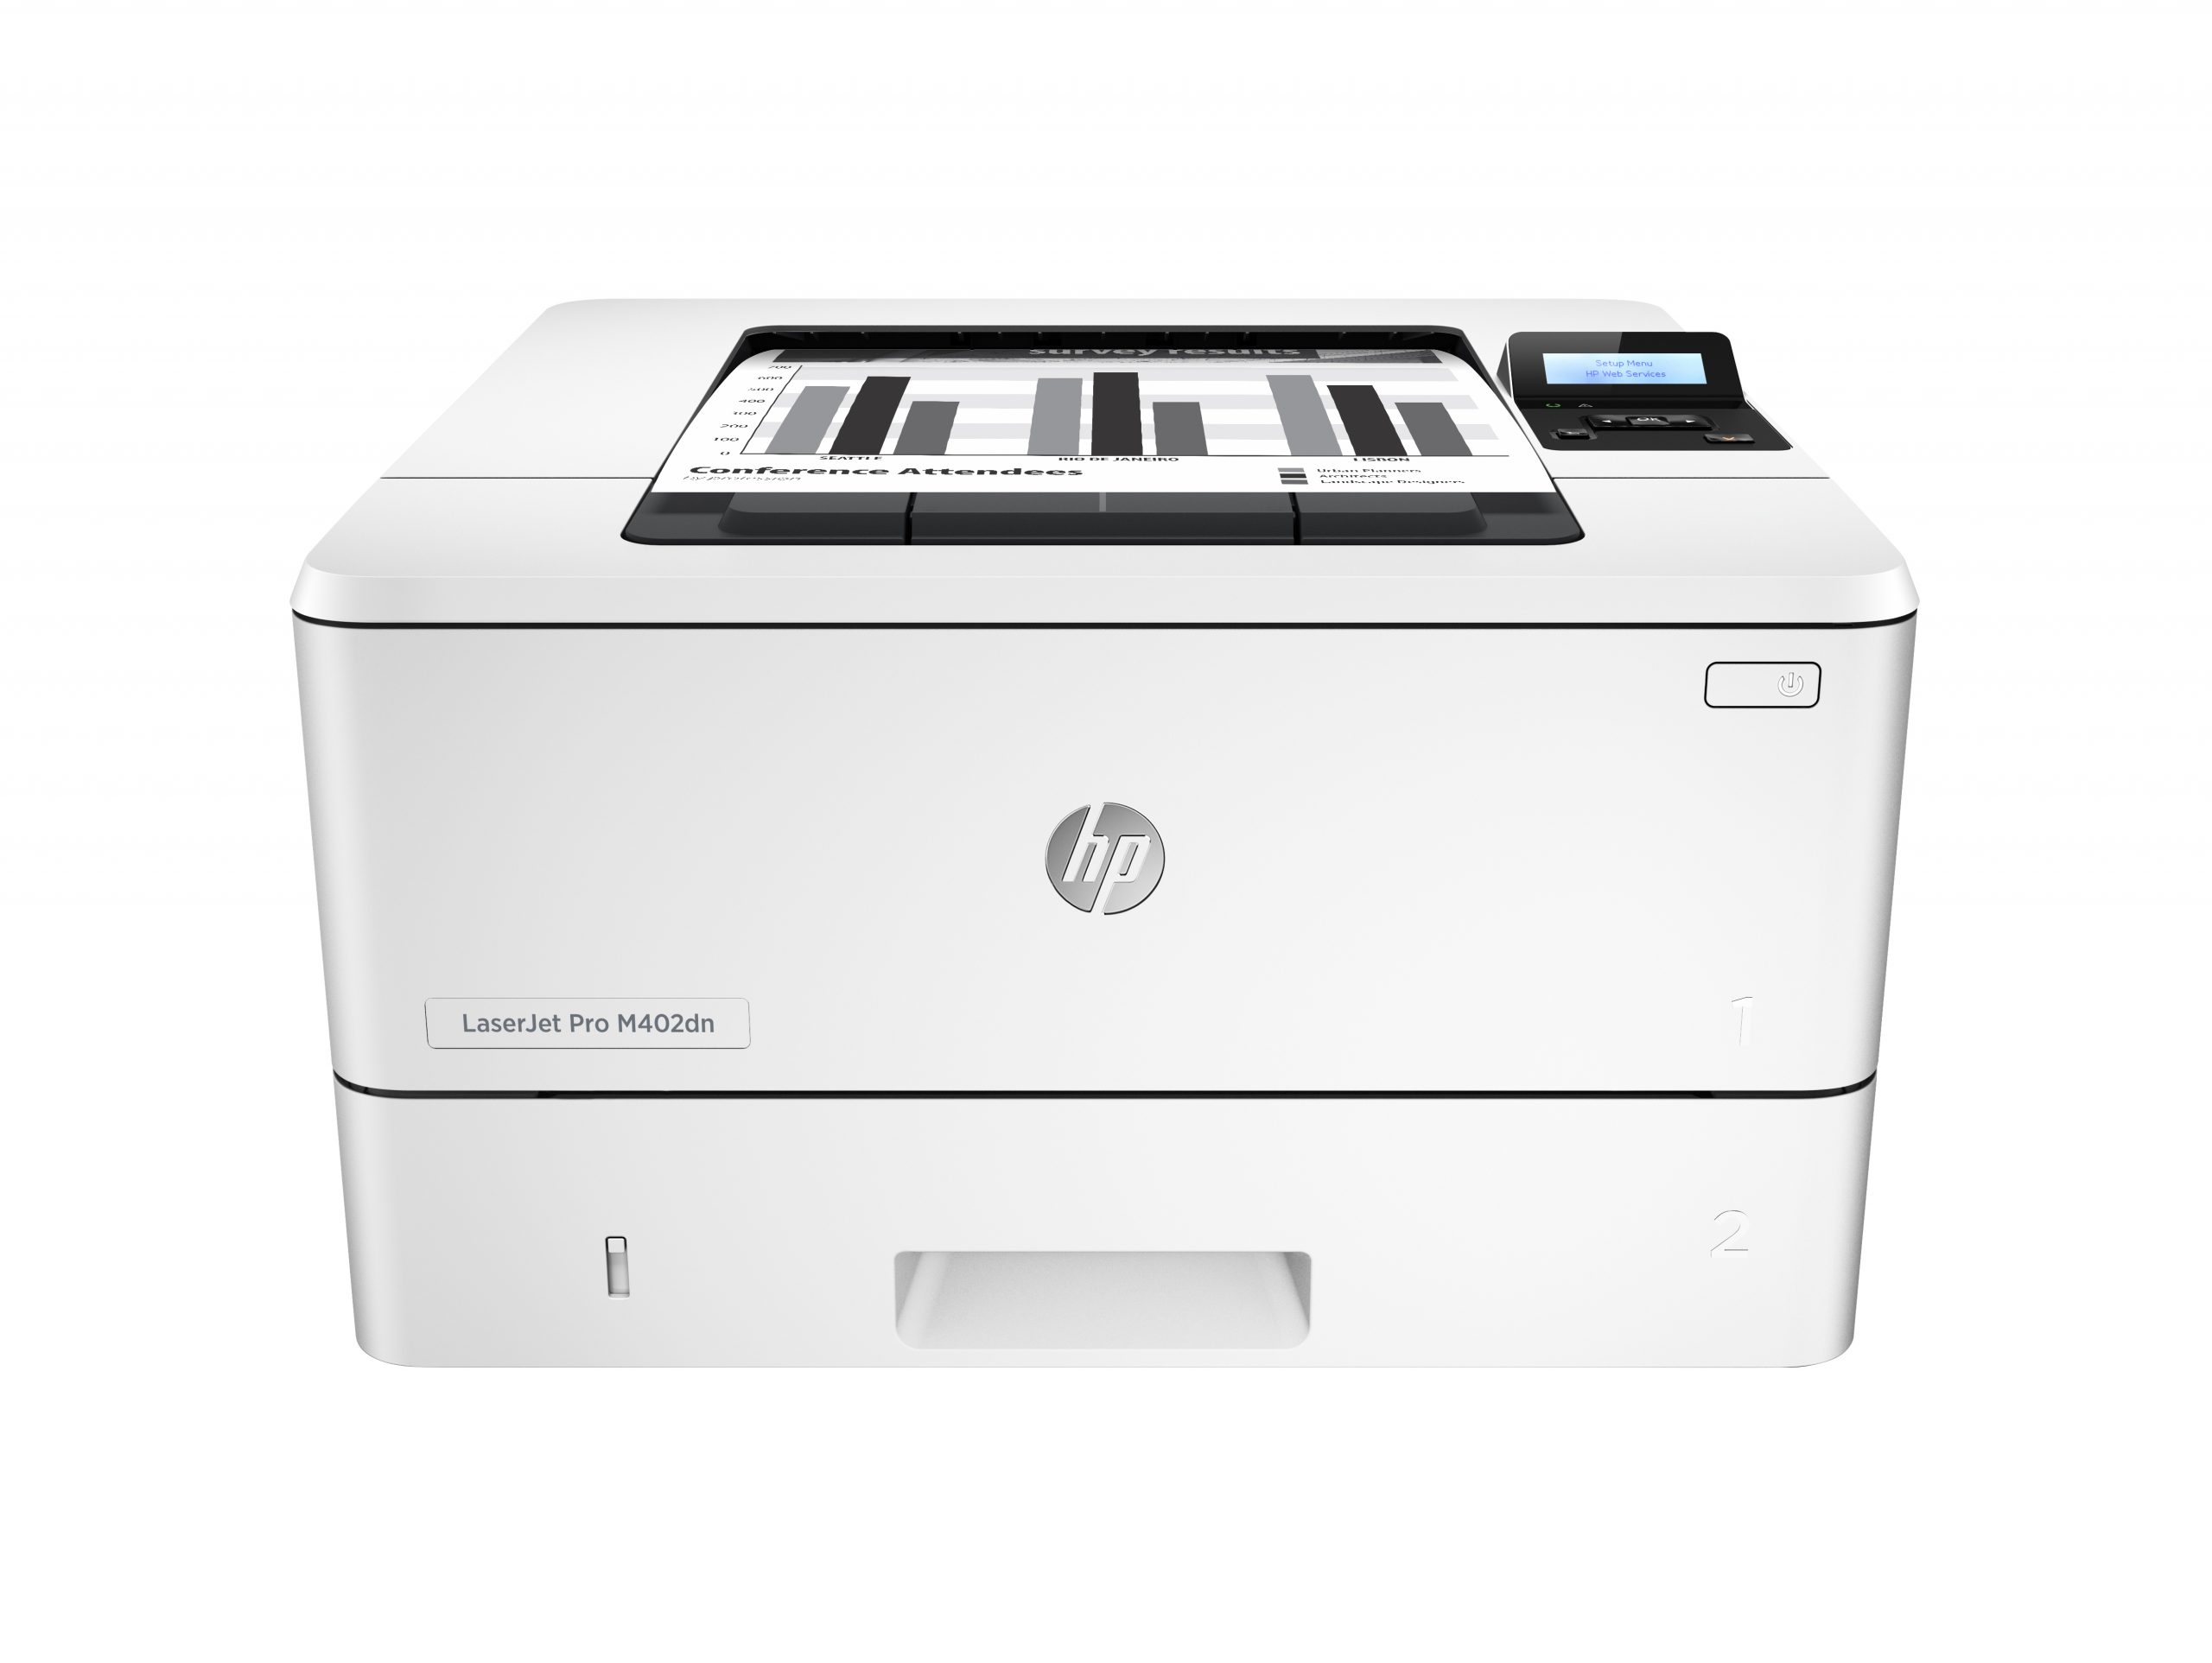 HP LaserJet Pro m402dn-c5f94a m402 A4 Monochrome B/W Printer WITH DUPLEX AND LAN 